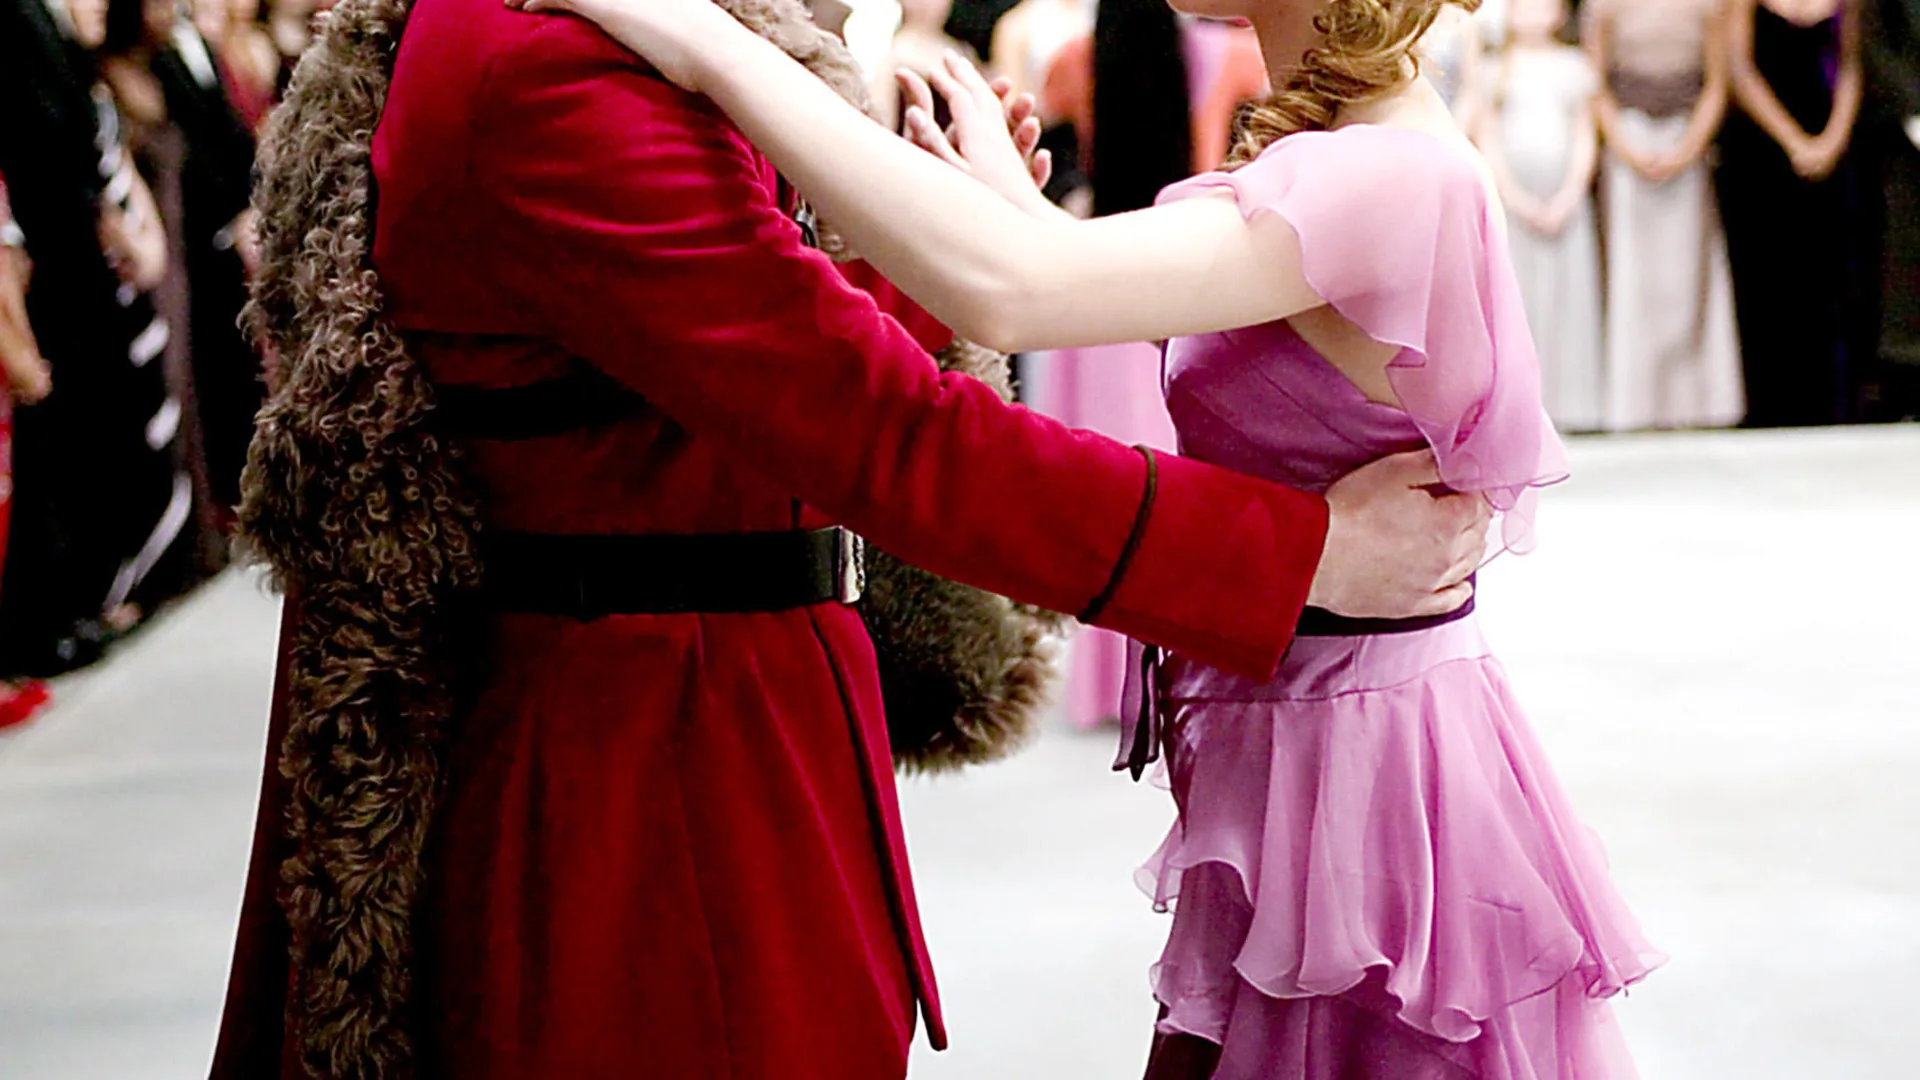 A photograph of a couple dancing. The man is wearing a red velvet coat and the girl is wearing a pink floaty dress.